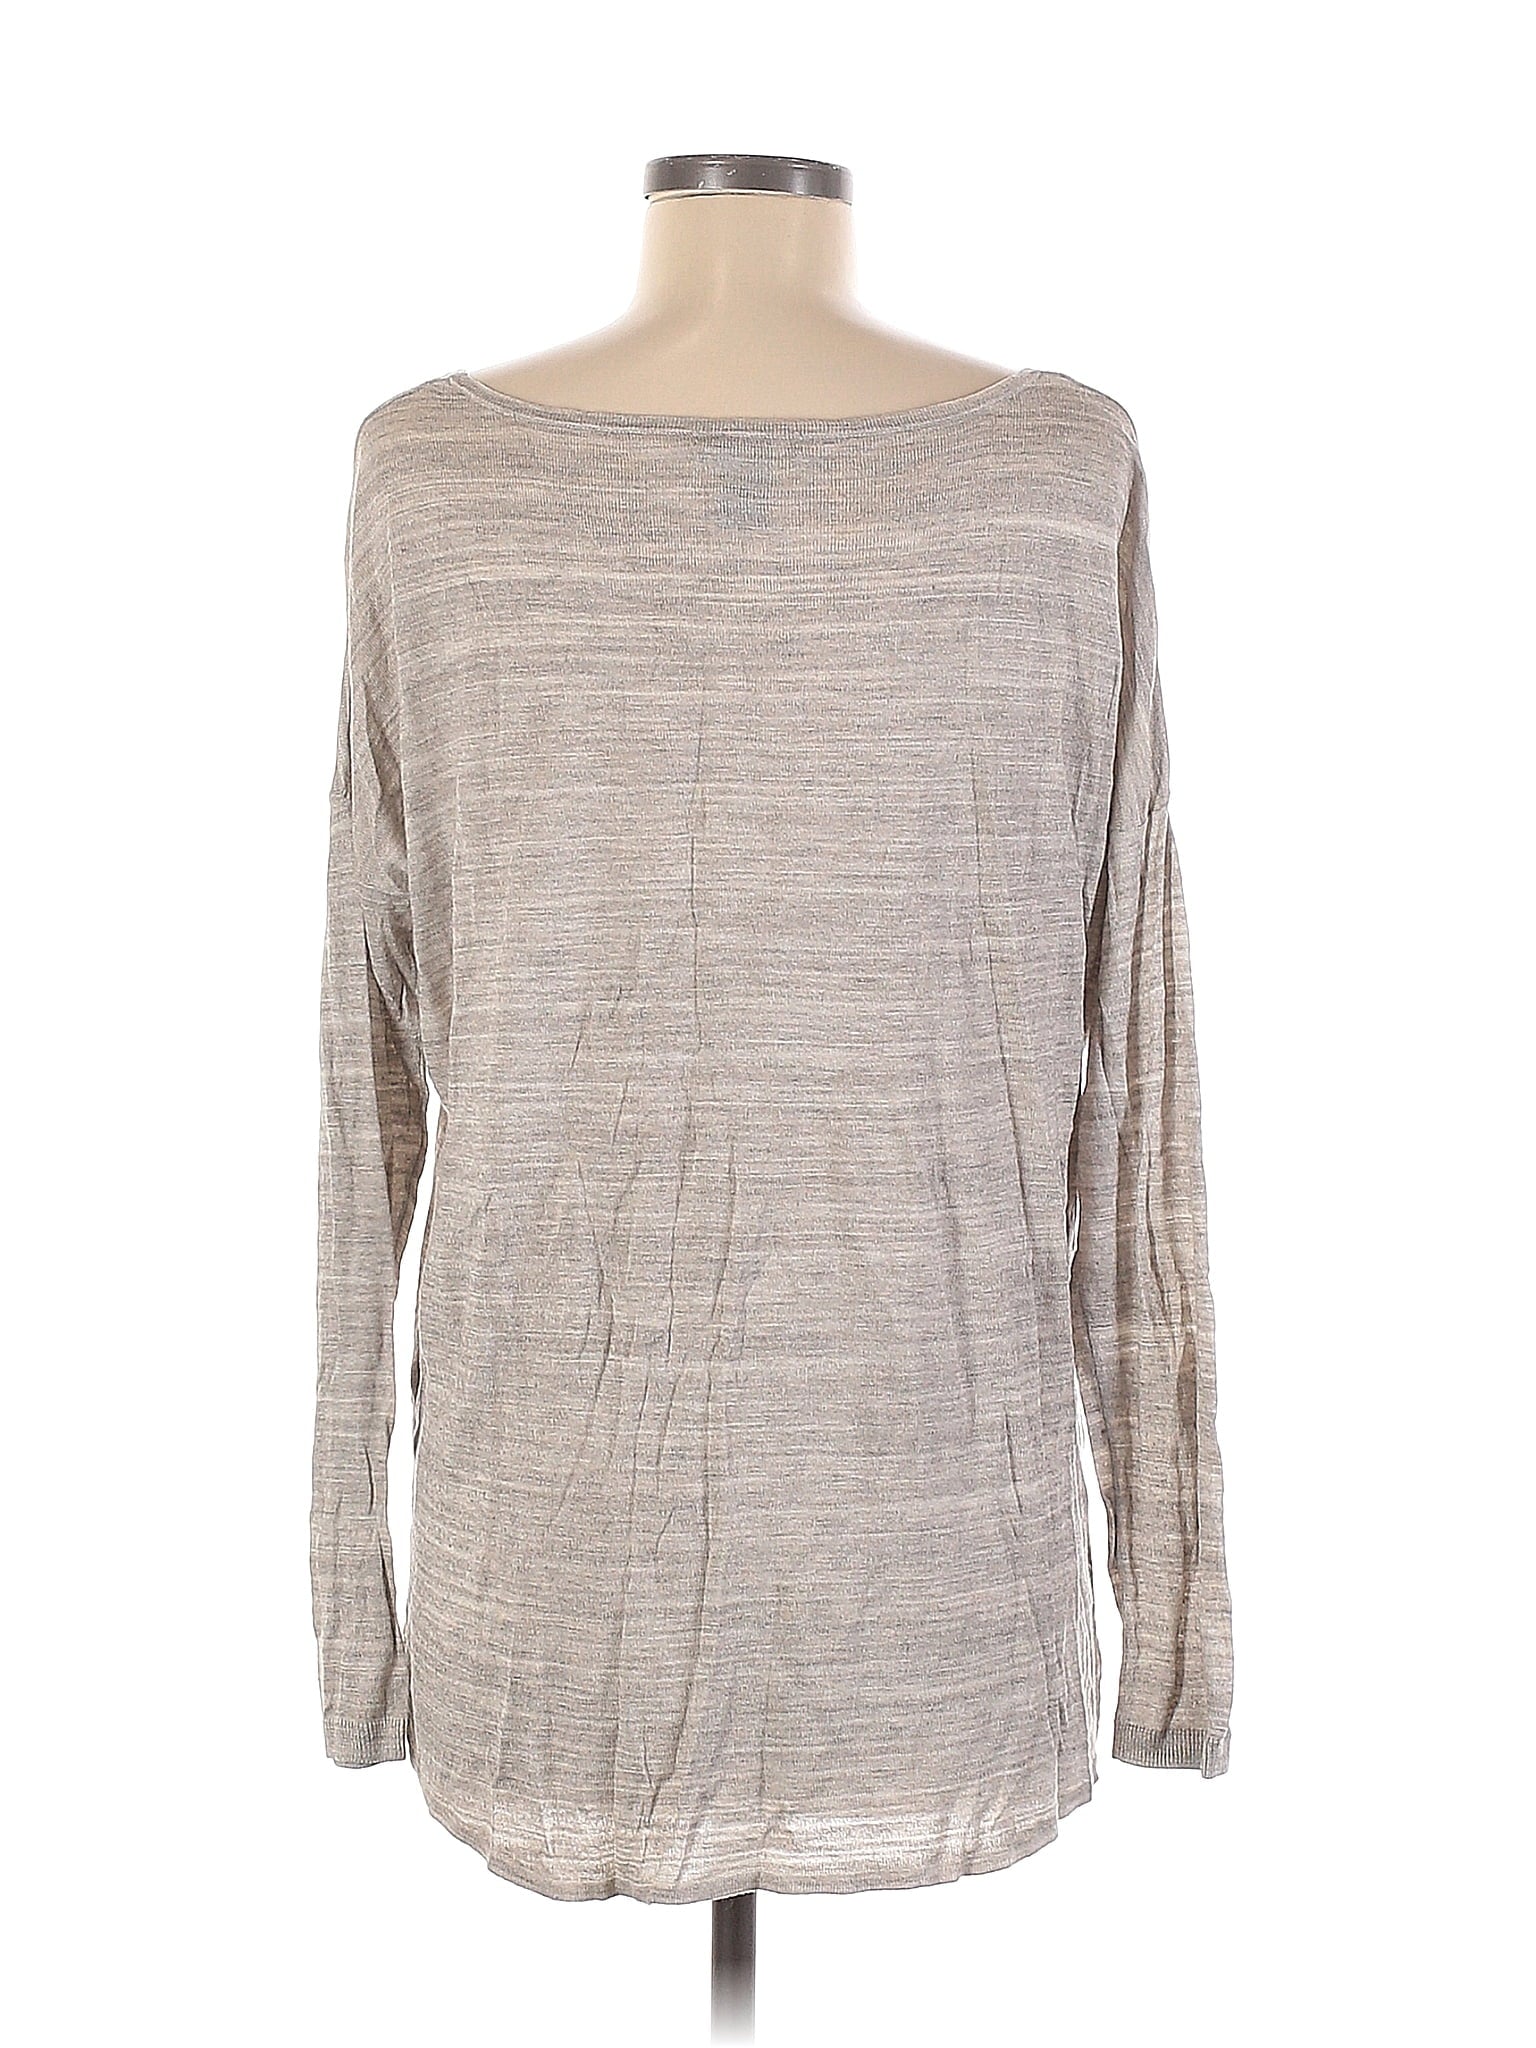 Long Sleeve Top size - M